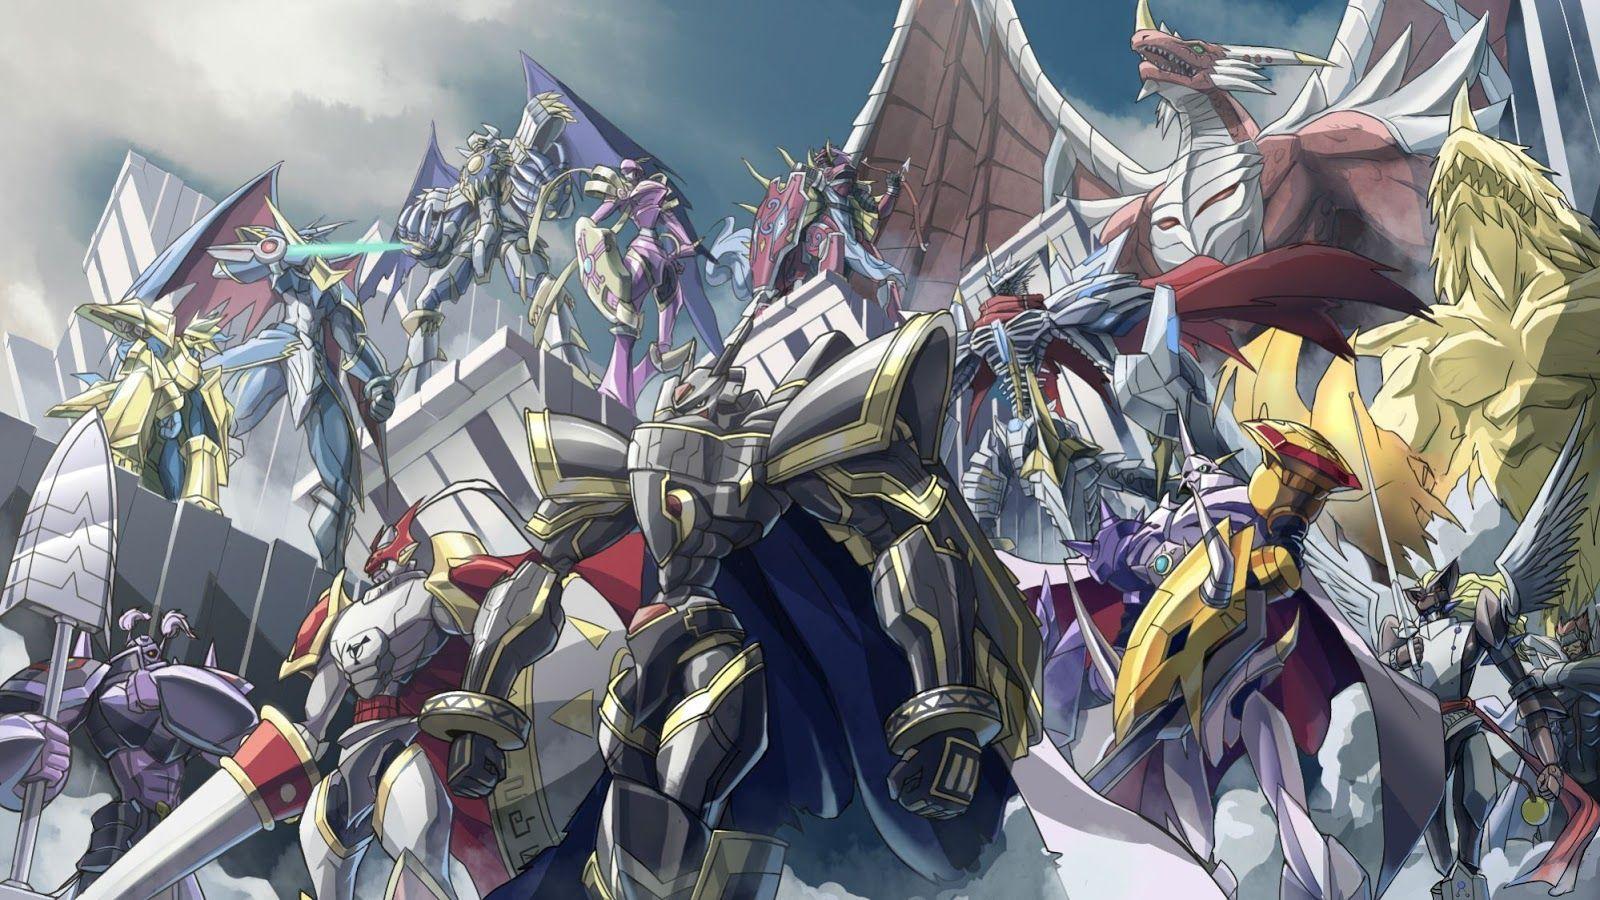 Amazing Royal Knight Digimon Wallpapers HD For Desktop.